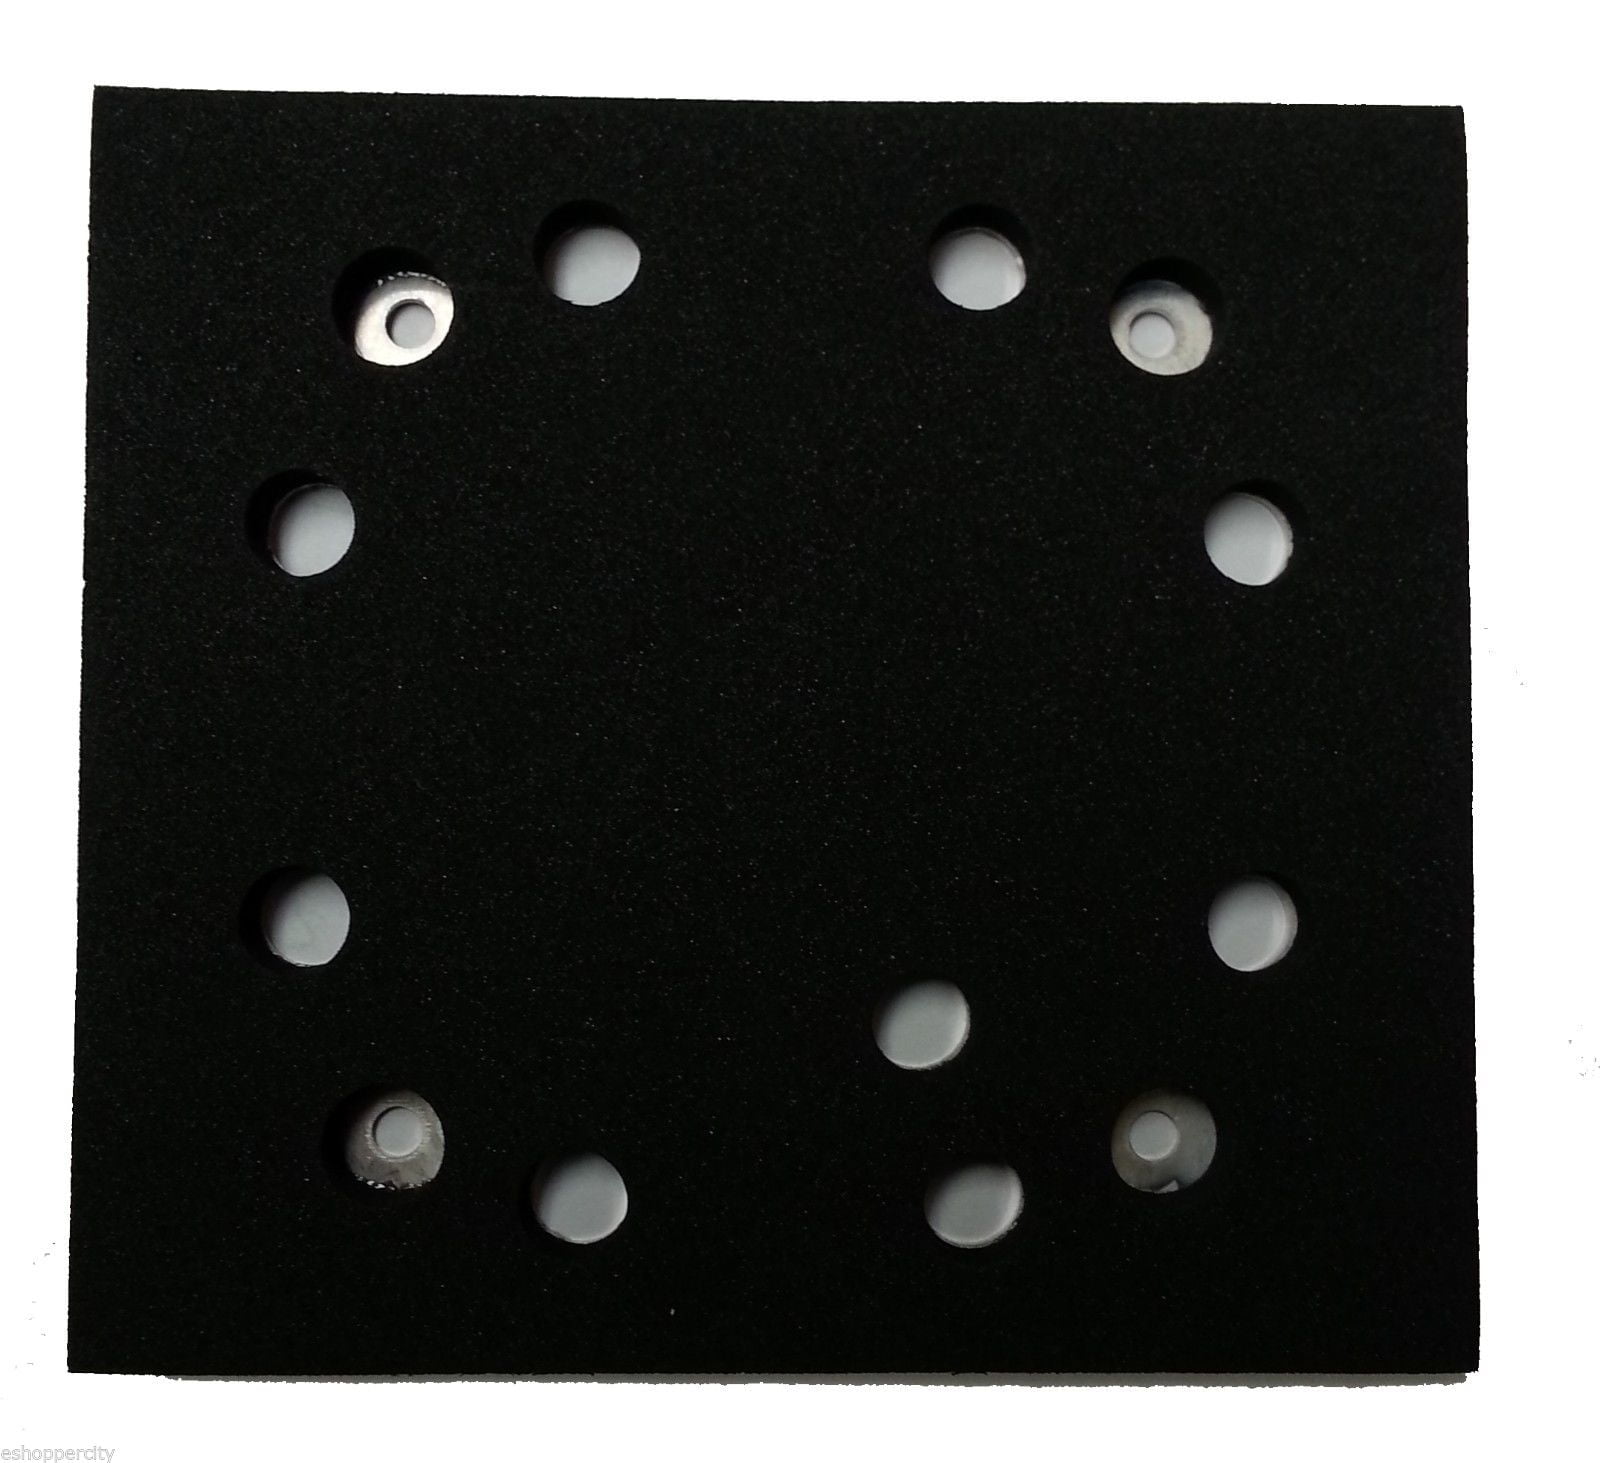 DW412 Type 1 BD5000 Type 1 1 D26441 Type 1 DW412 Type 2 DW411 Type 3 HASMX Sander Pad & Backing Plate 1/4 Square,8 Hole Stick on Square Sanding Pad for Dewalt Models DW411 Type 2 DW411 Type 1 